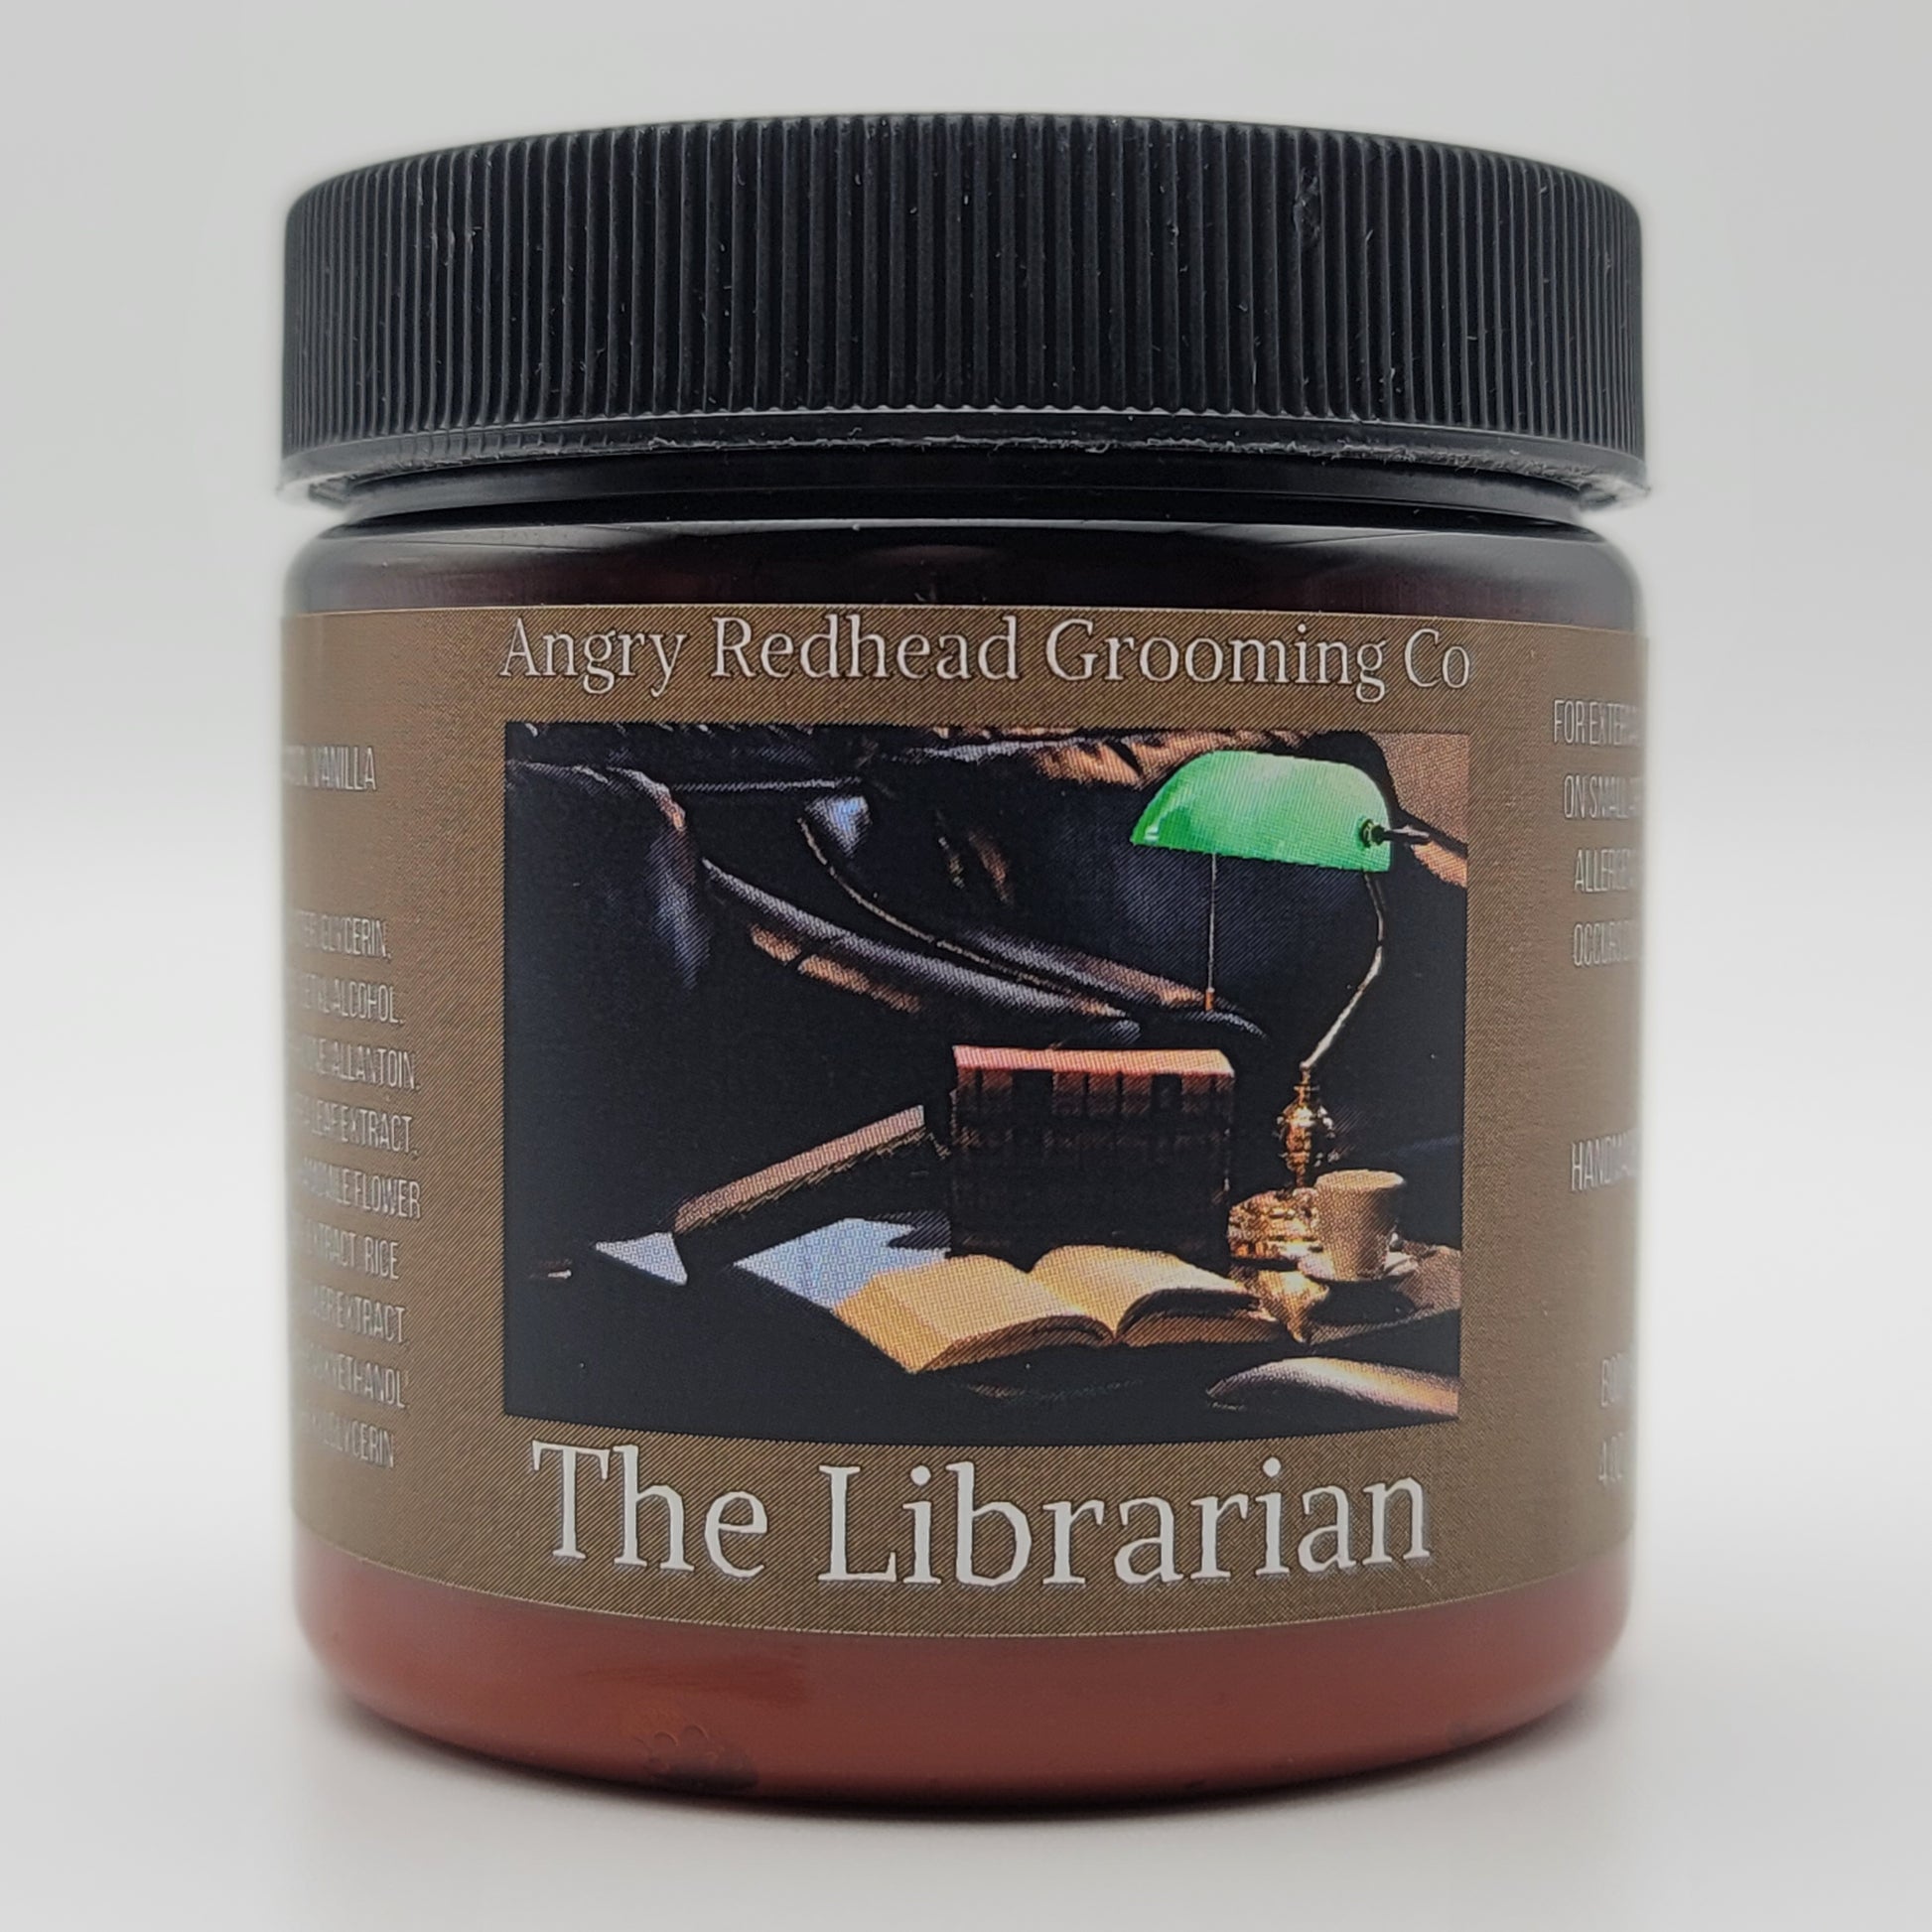 The Librarian Body Butter by Angry Redhead Grooming Co - angryredheadgrooming.com